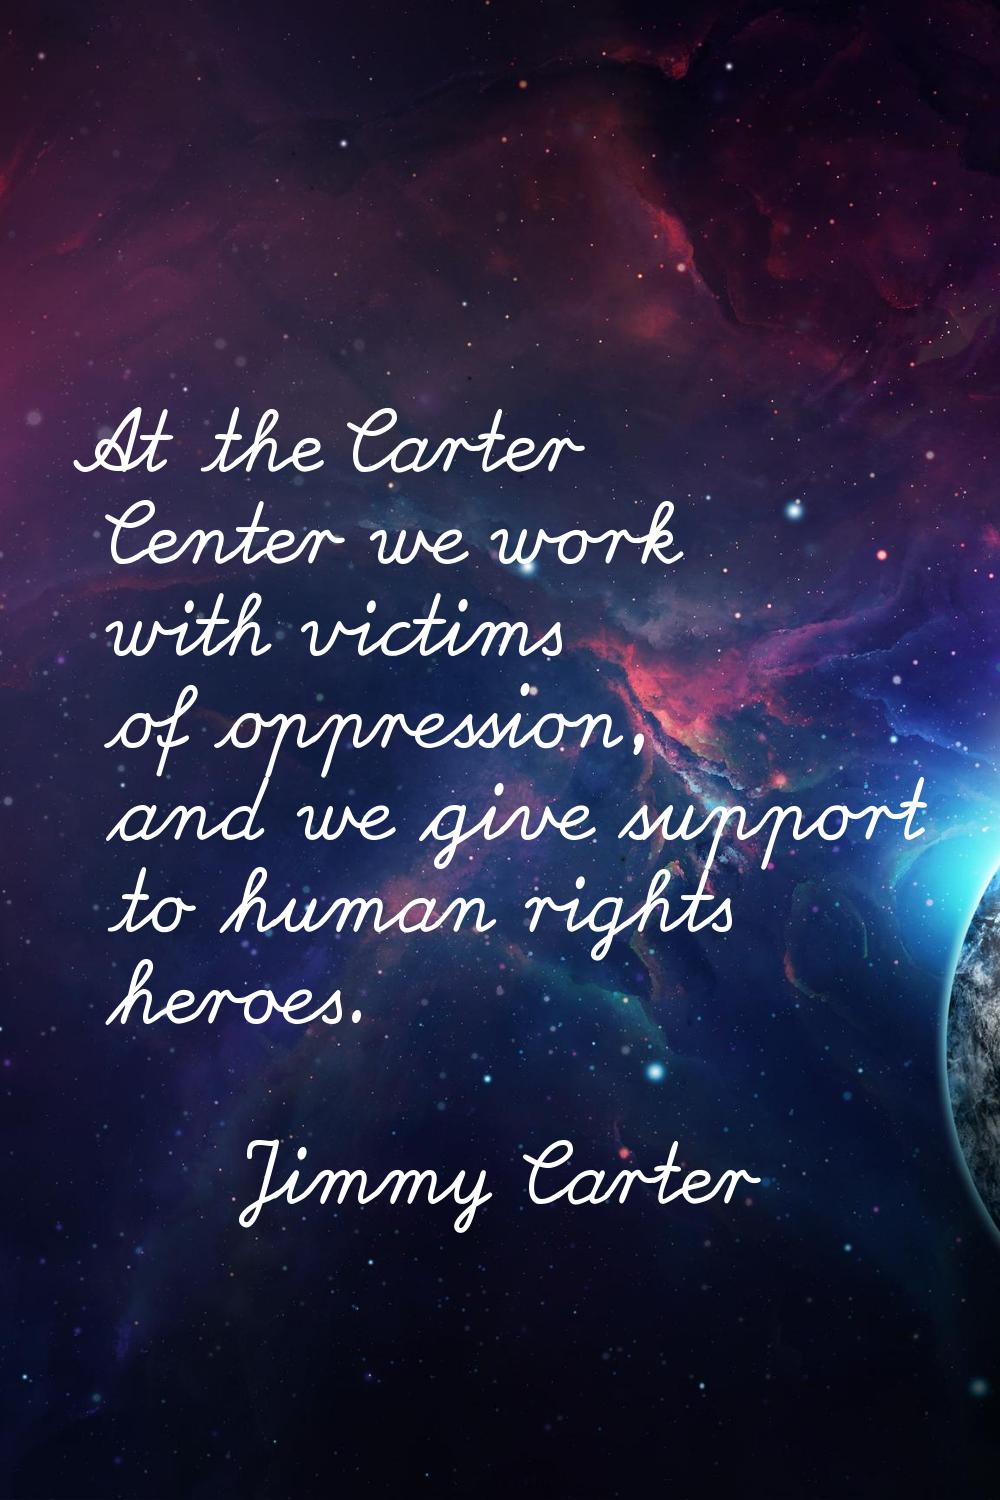 At the Carter Center we work with victims of oppression, and we give support to human rights heroes